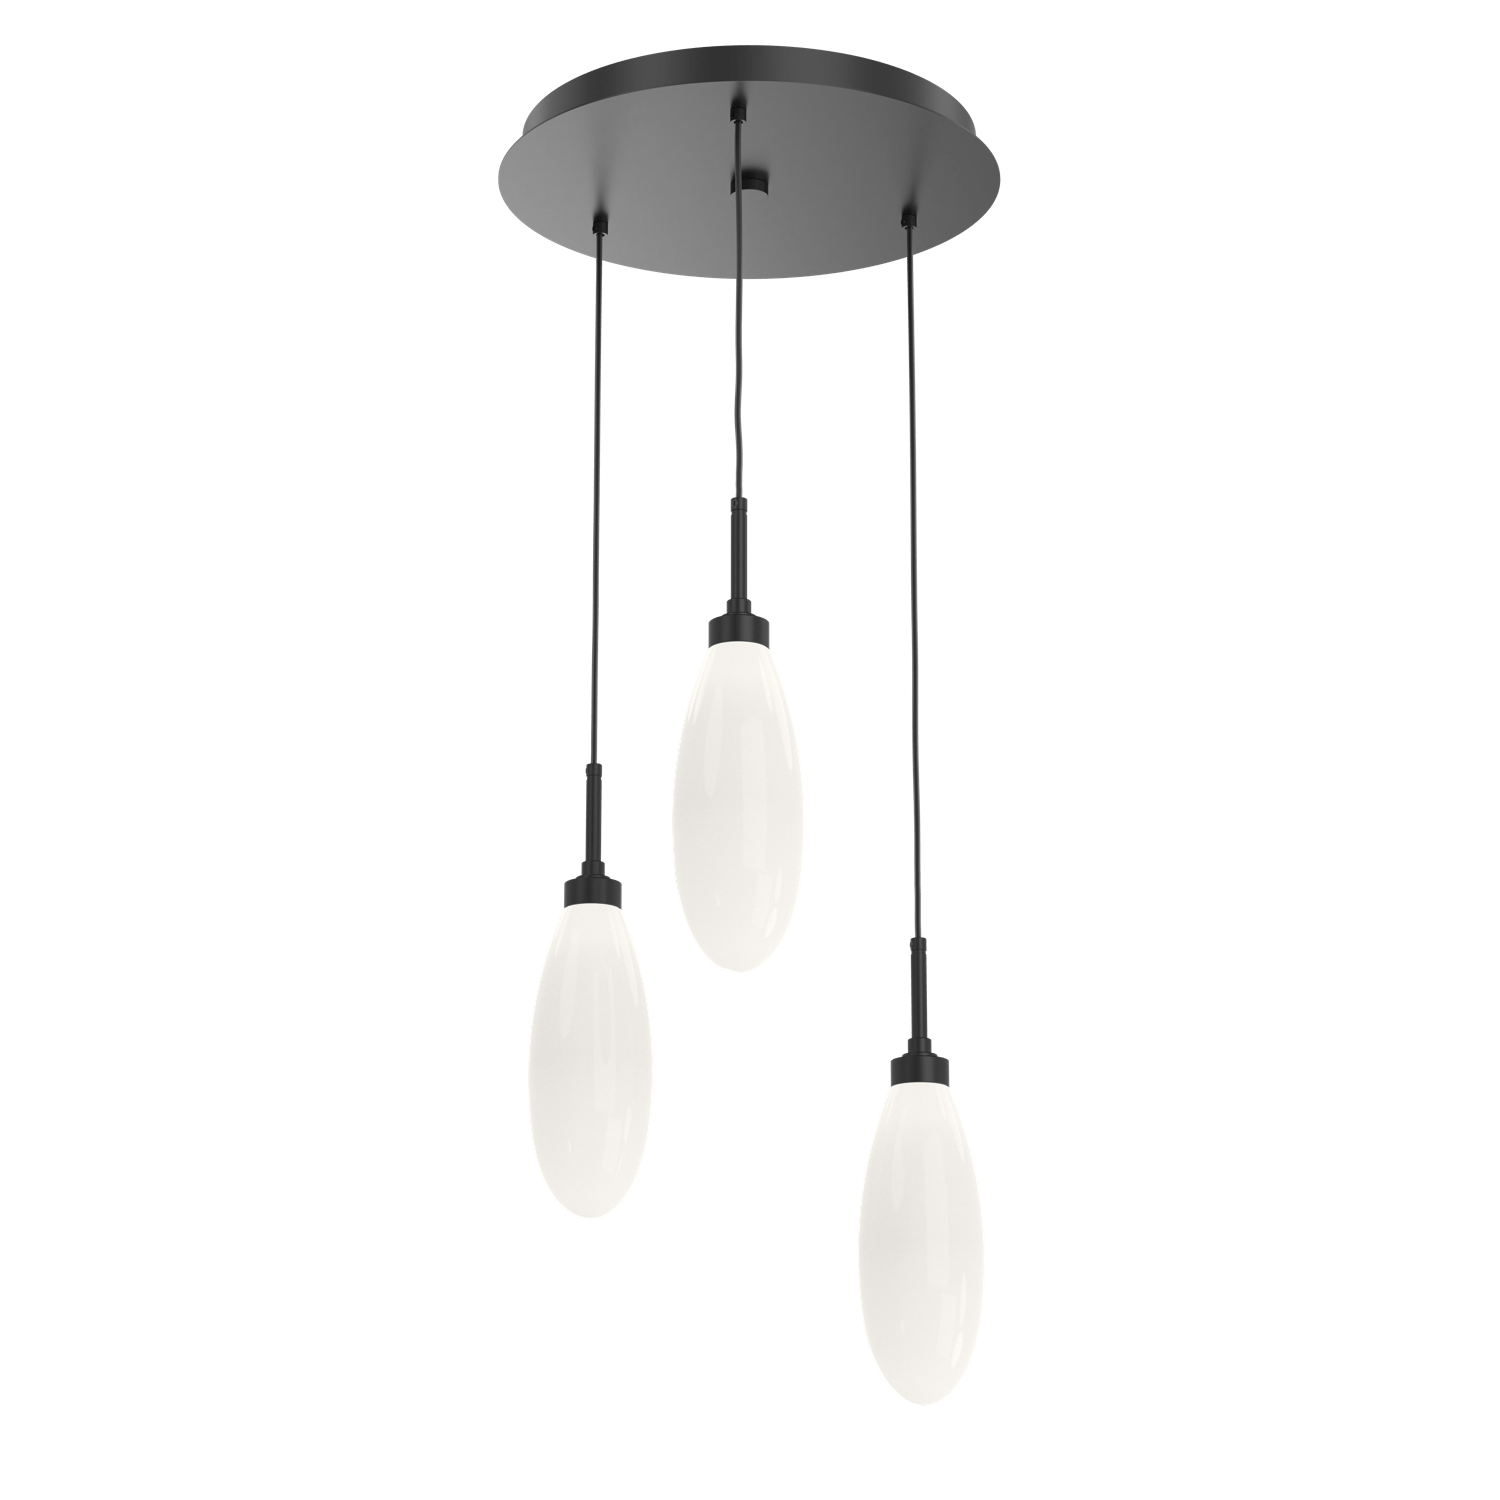 CHB0071-03-MB-WL-LL-Hammerton-Studio-Fiori-3-light-round-pendant-chandelier-with-matte-black-finish-and-opal-white-glass-shades-and-LED-lamping